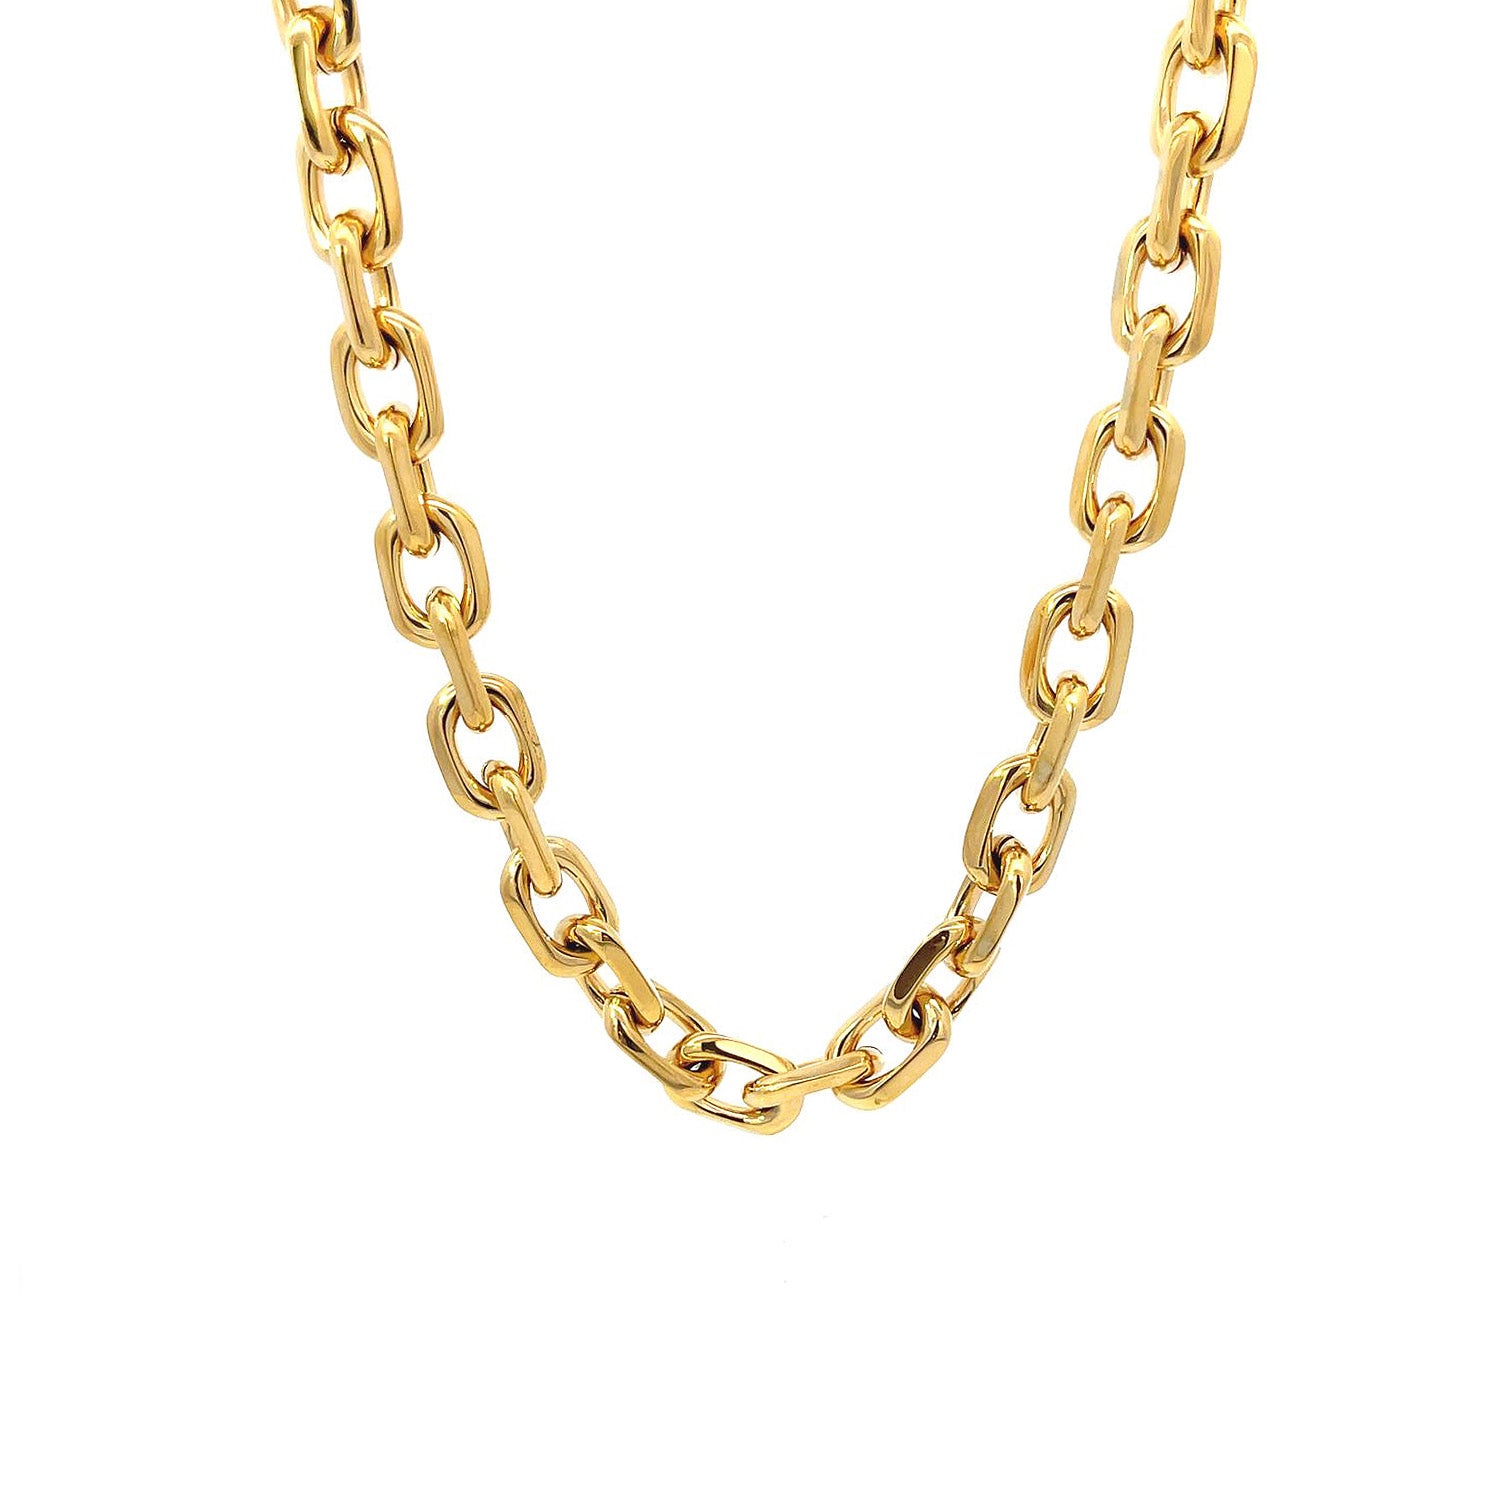 "SHAYE" Trace Chain Necklace